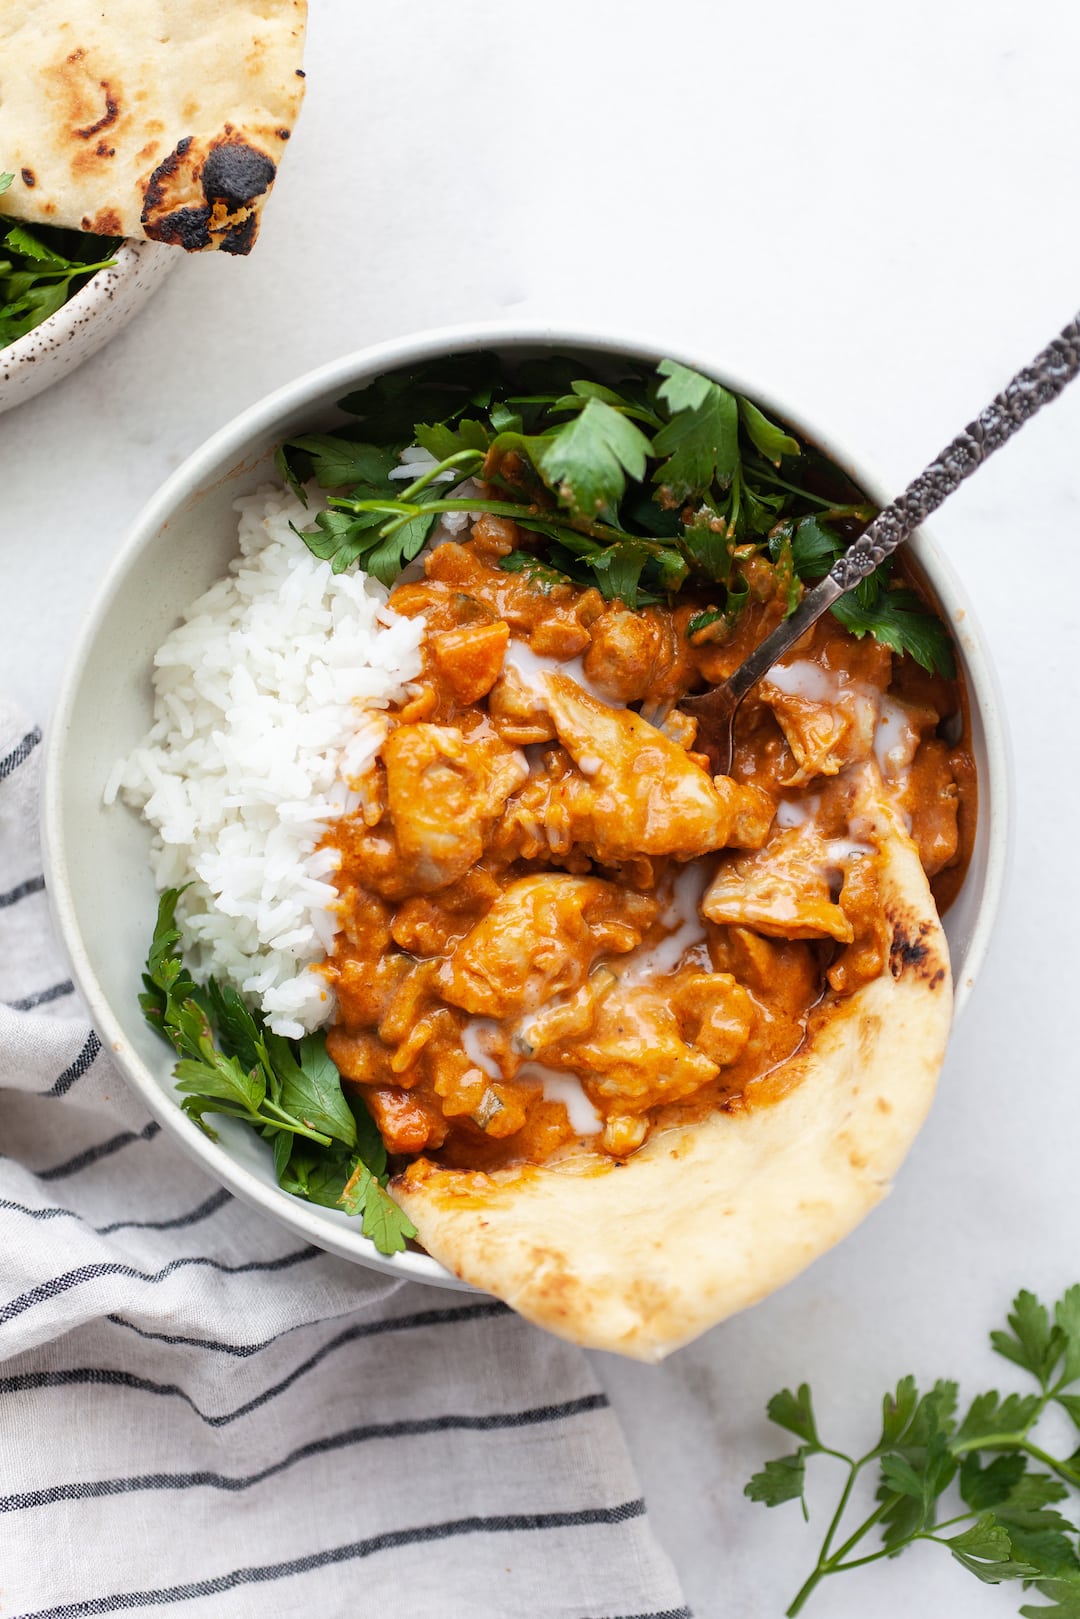 Bowl of dairy free butter chicken with naan, rice, and parsley